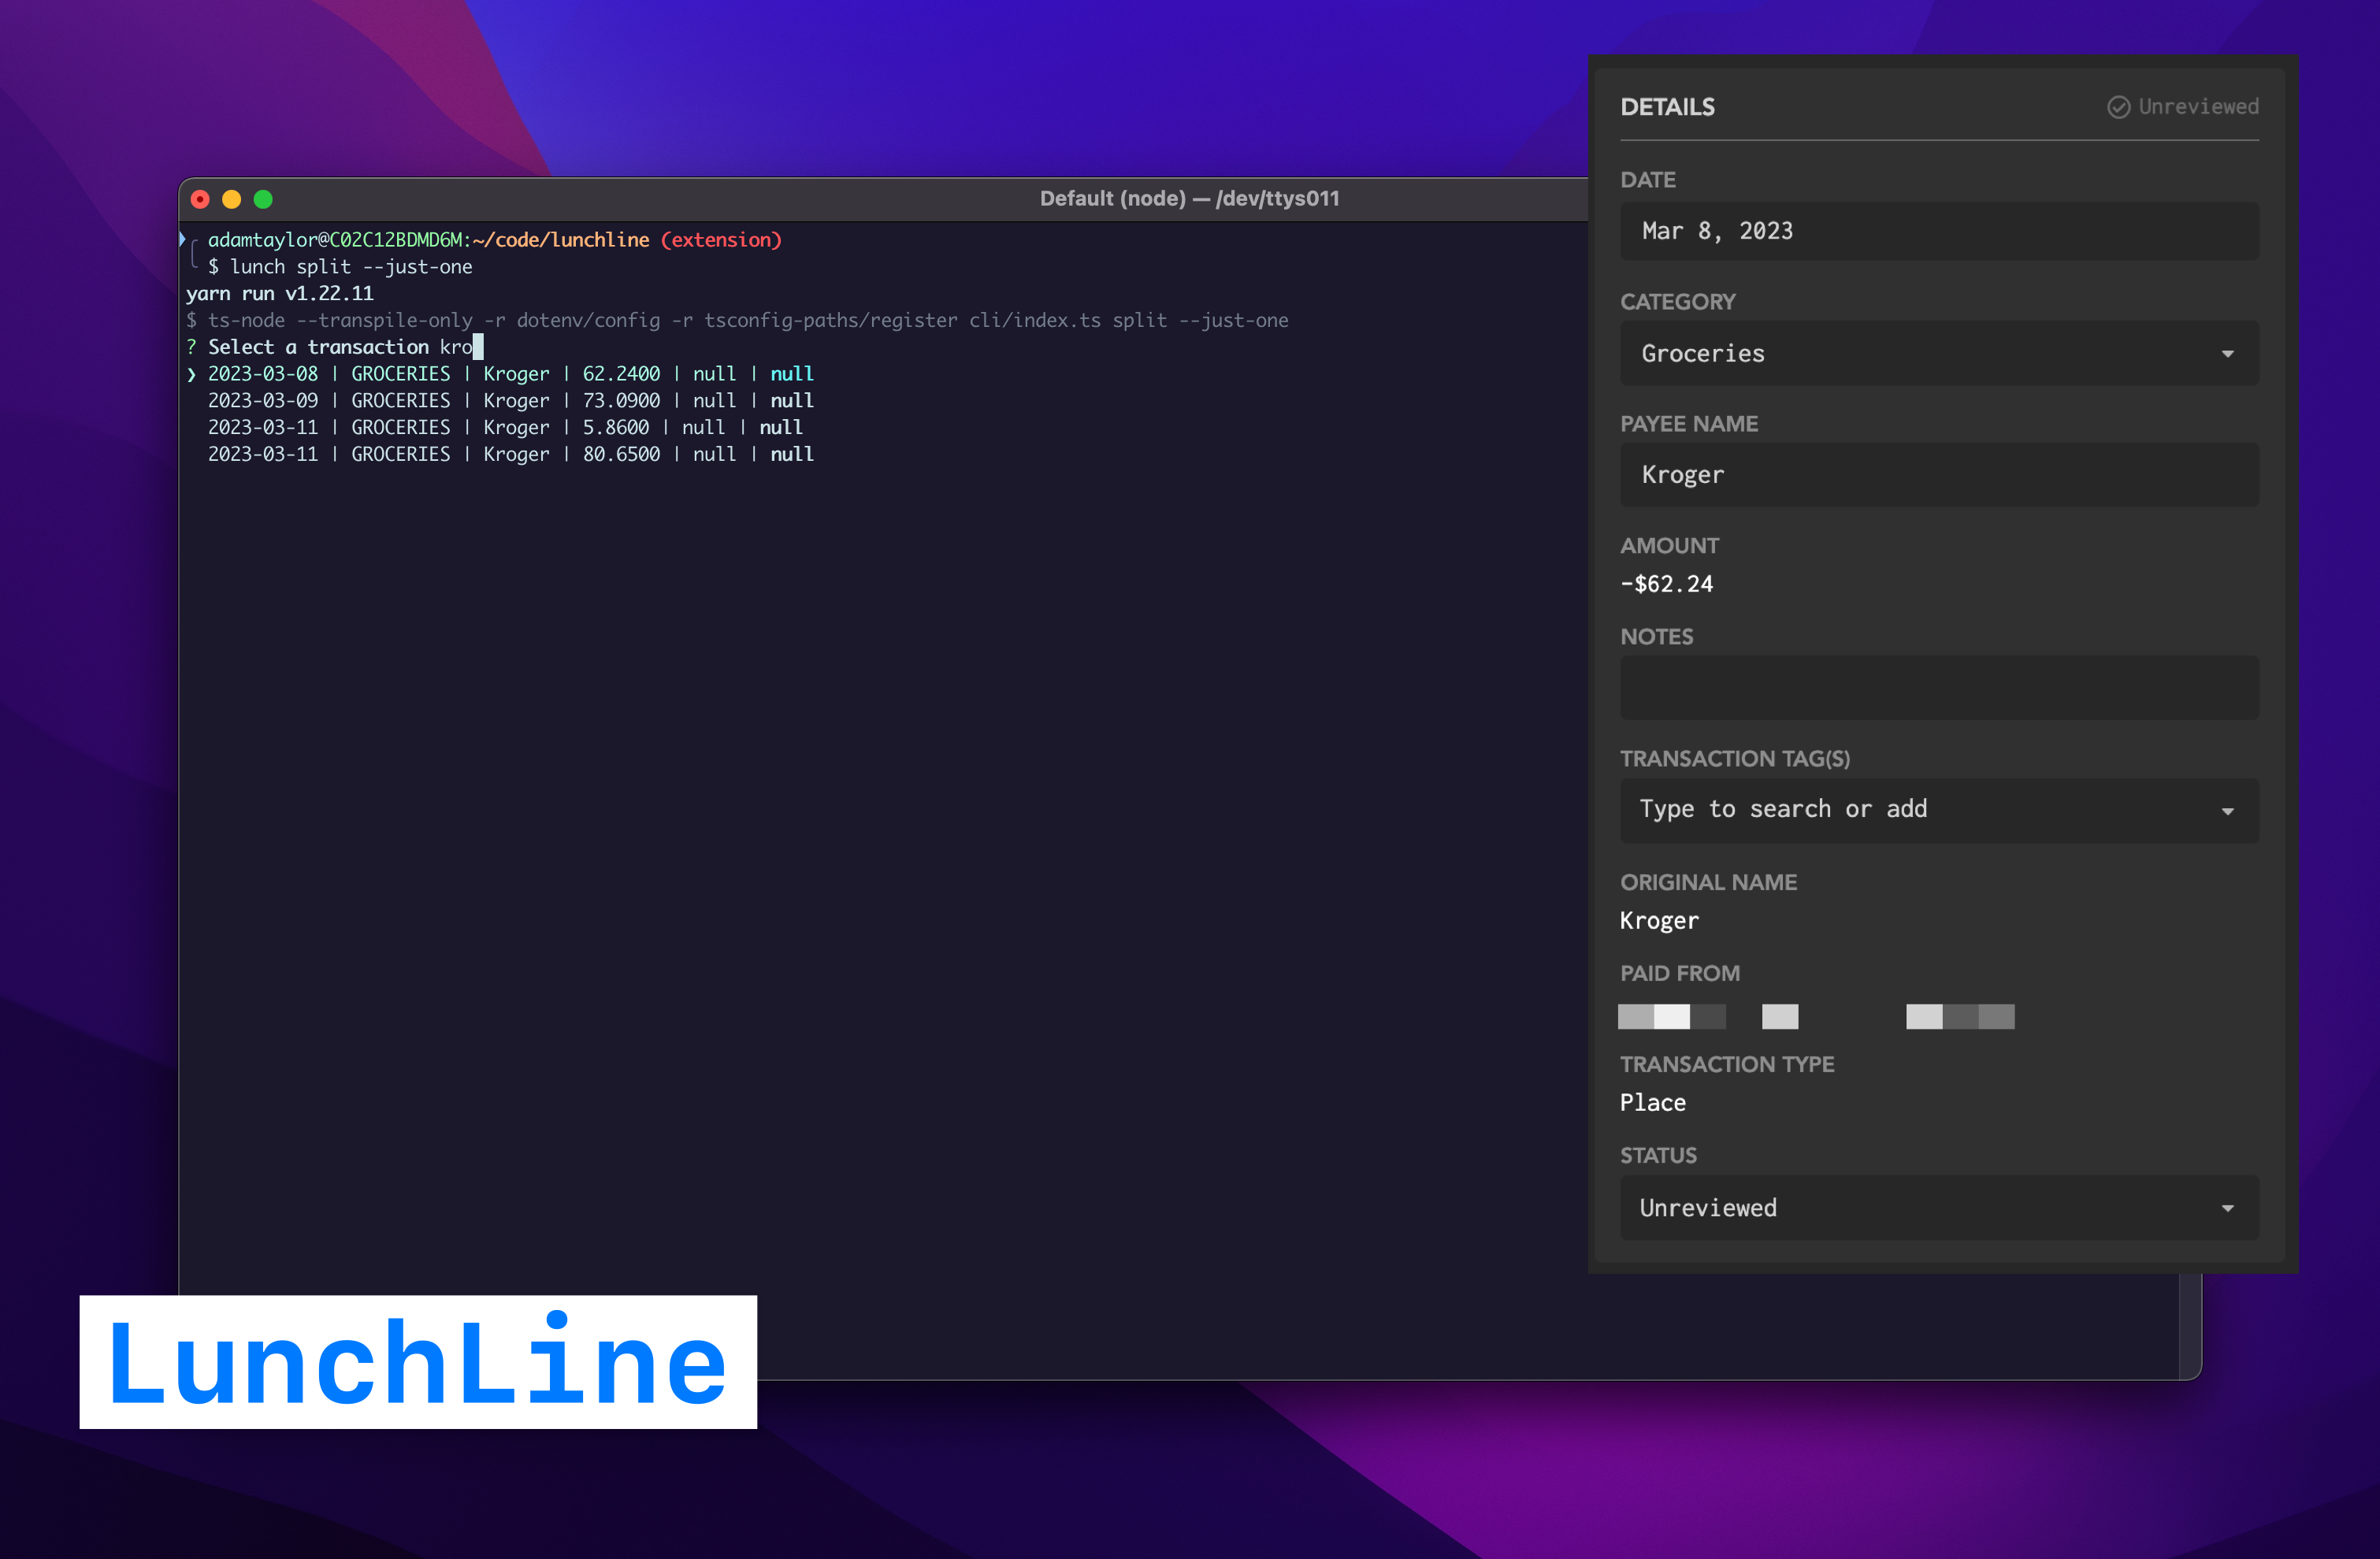 LunchLine is a CLI tool to categorize and split a large transaction into smaller, more accurate transactions